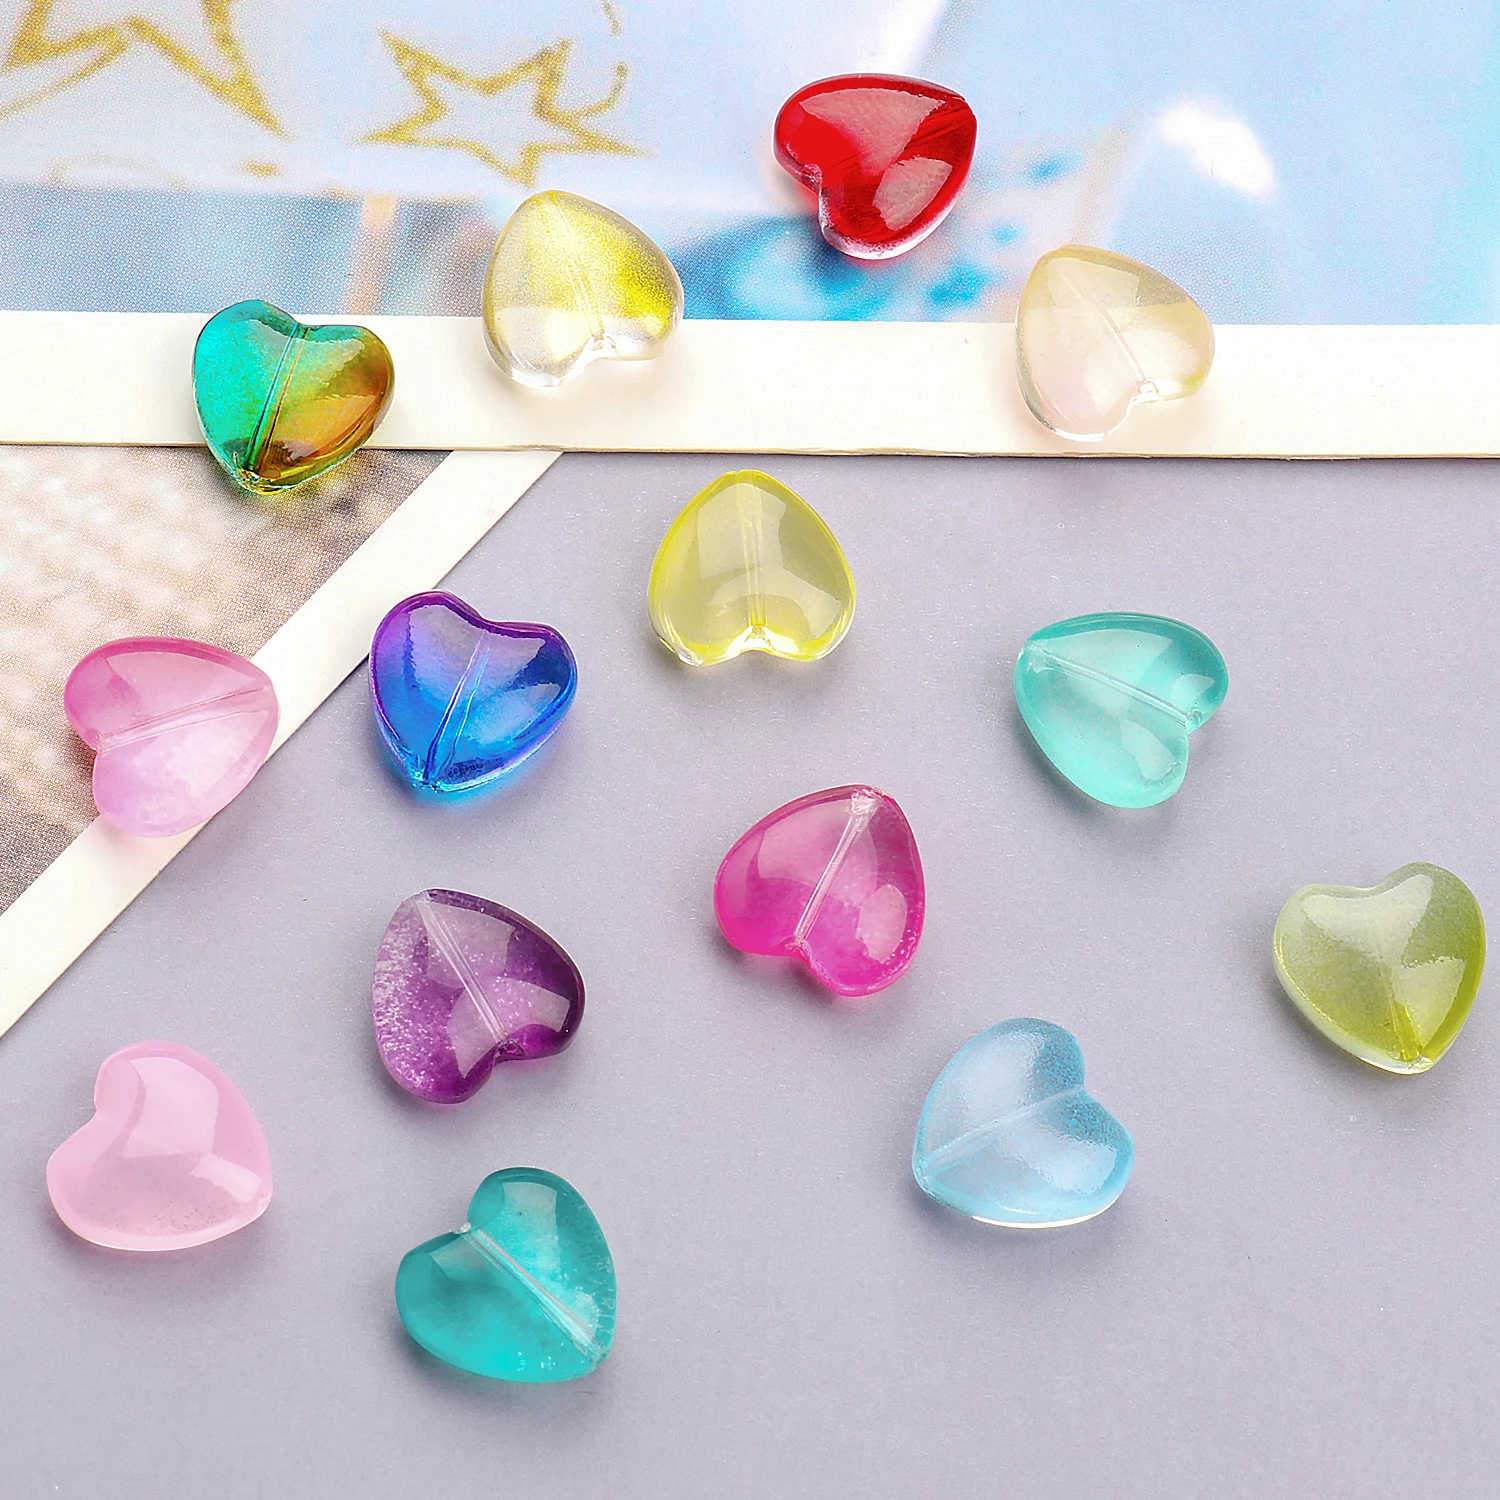 

20 40 60pcs Love Heart Czech Lampwork Crystal Glass Spacer Beads For Jewelry Making Diy Needlework Bracelet Hairpin Findings